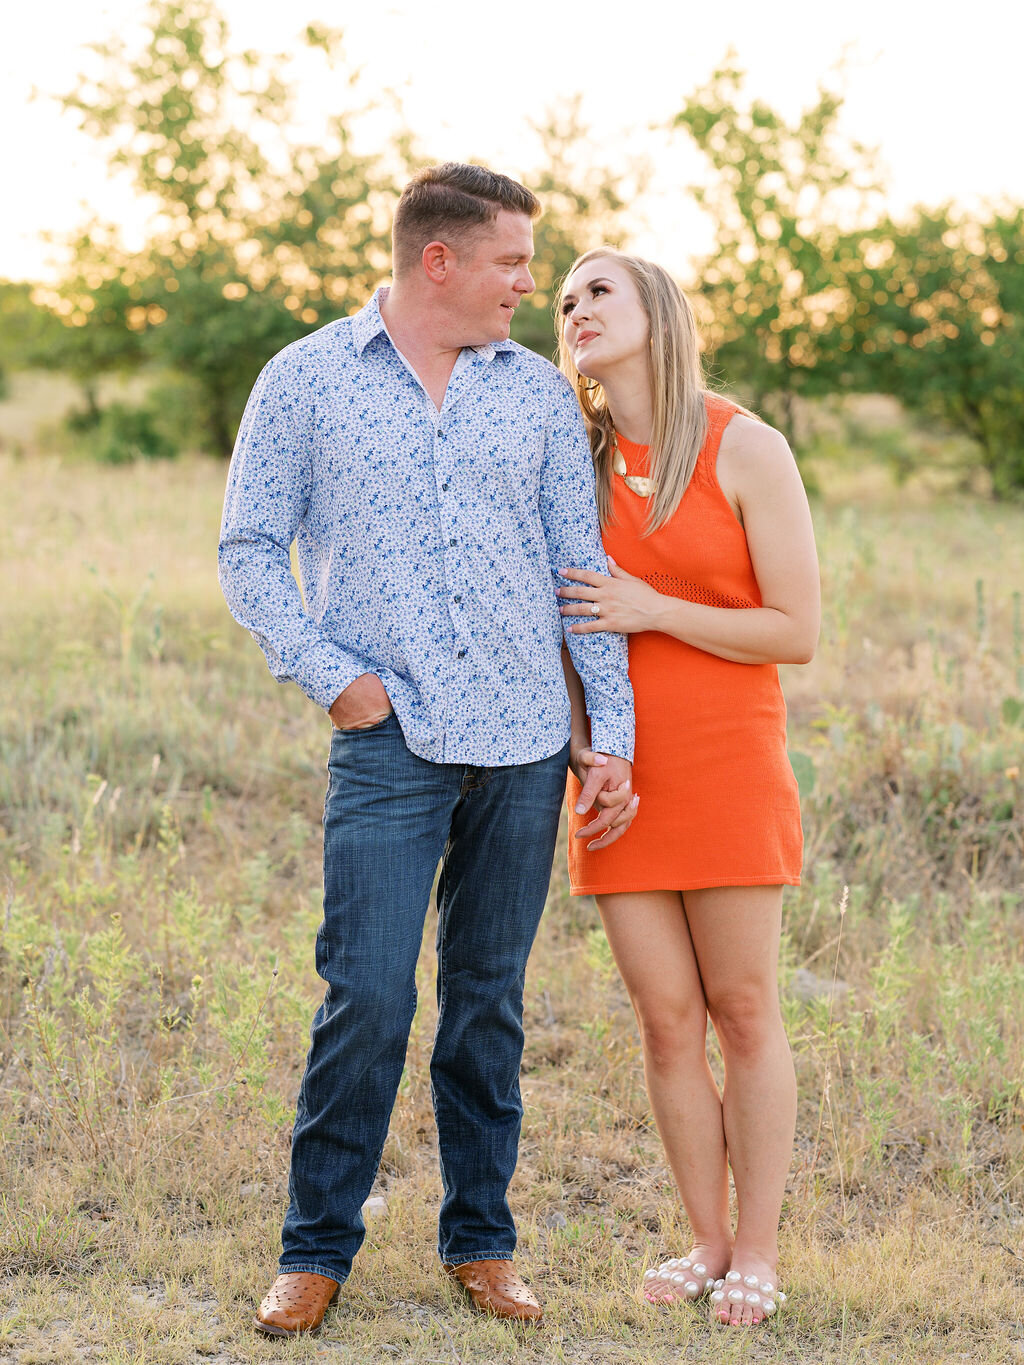 Engagement portraits on family ranch12